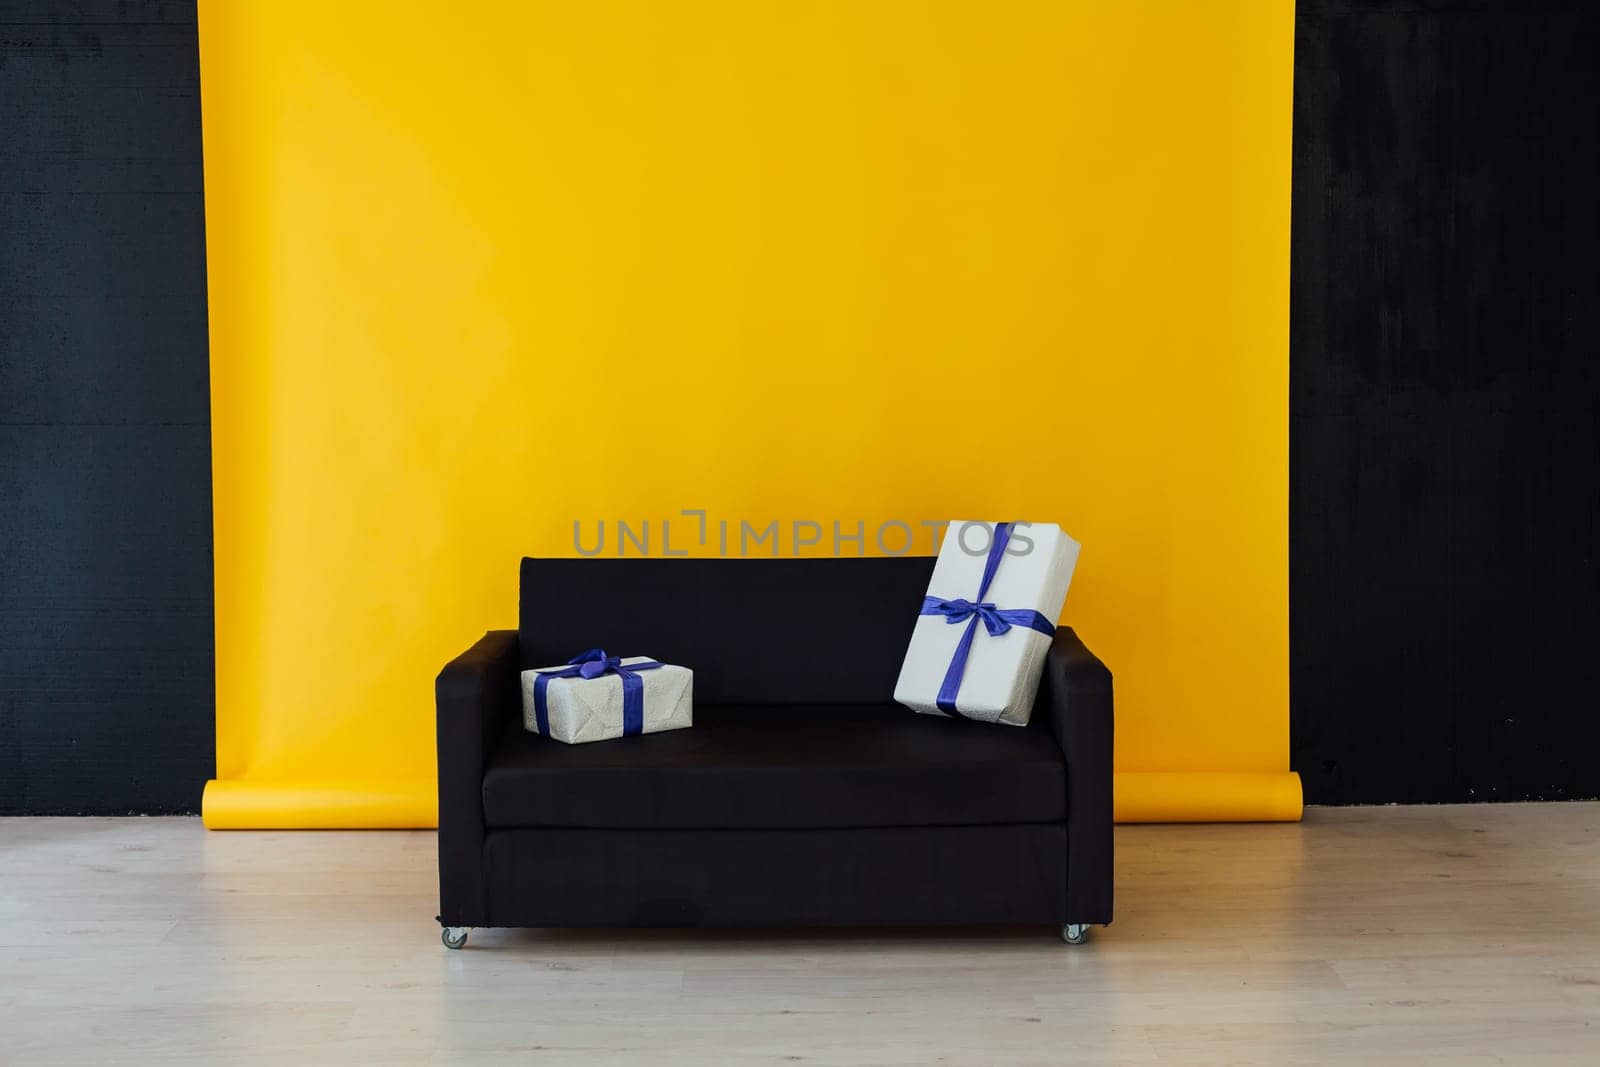 black sofa with feasting gifts in the interior of the room with a yellow background